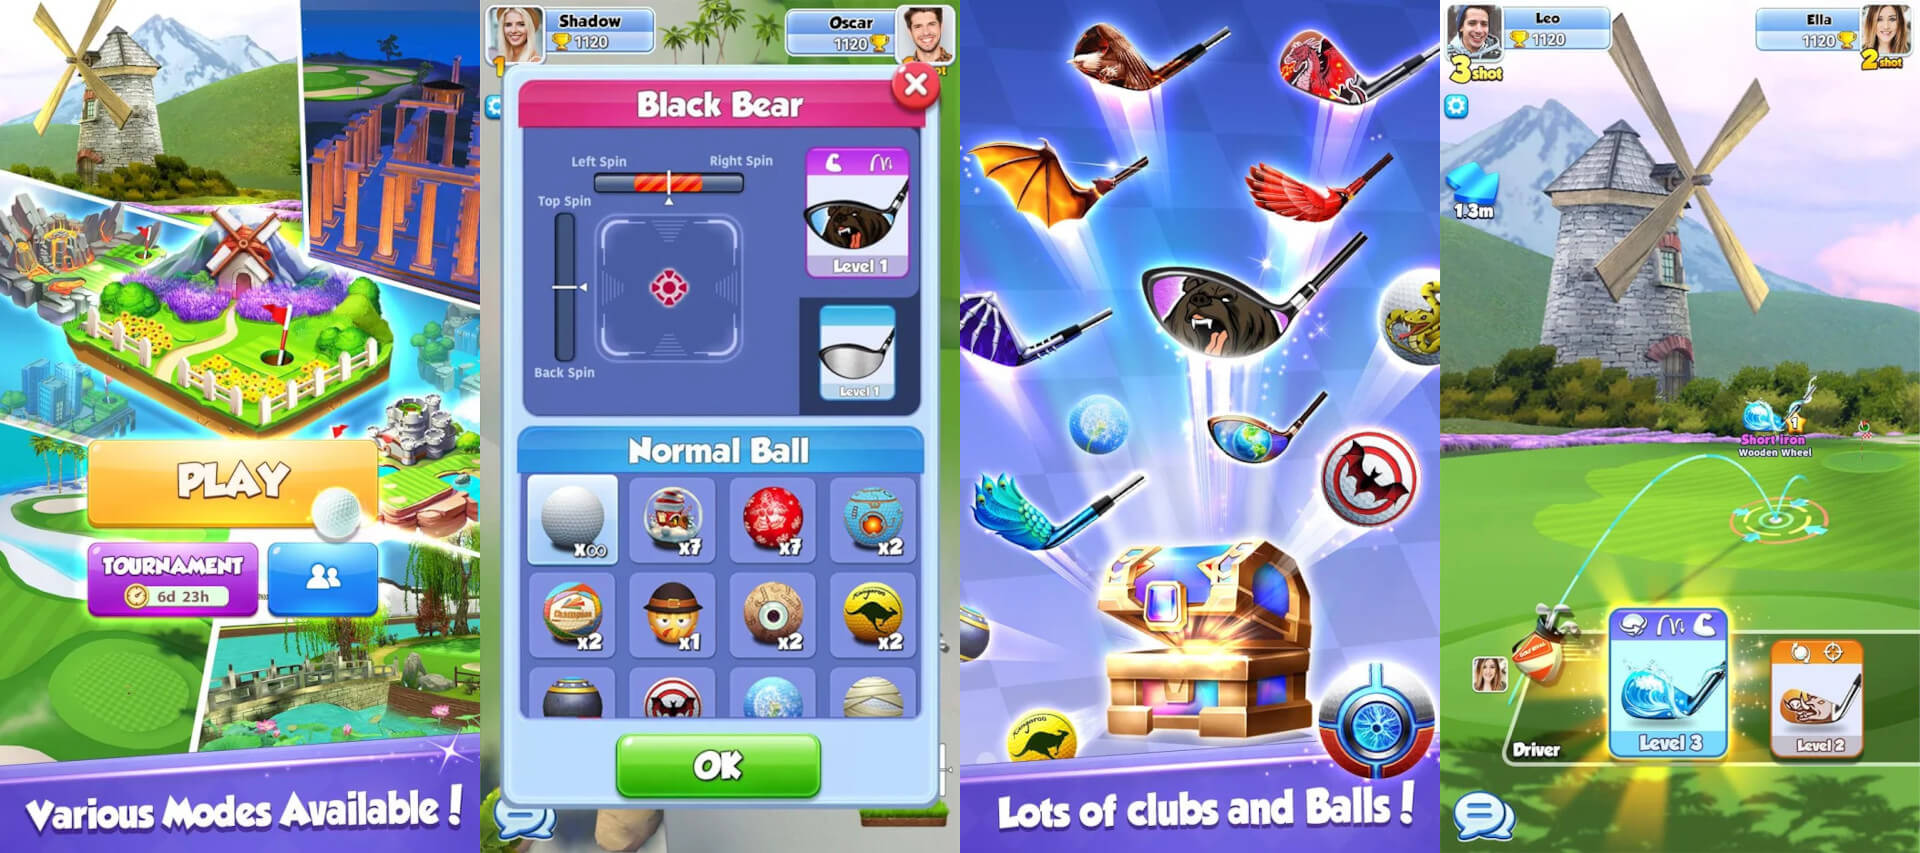 Golf Rival, a game by new Zynga acquisition StarLark